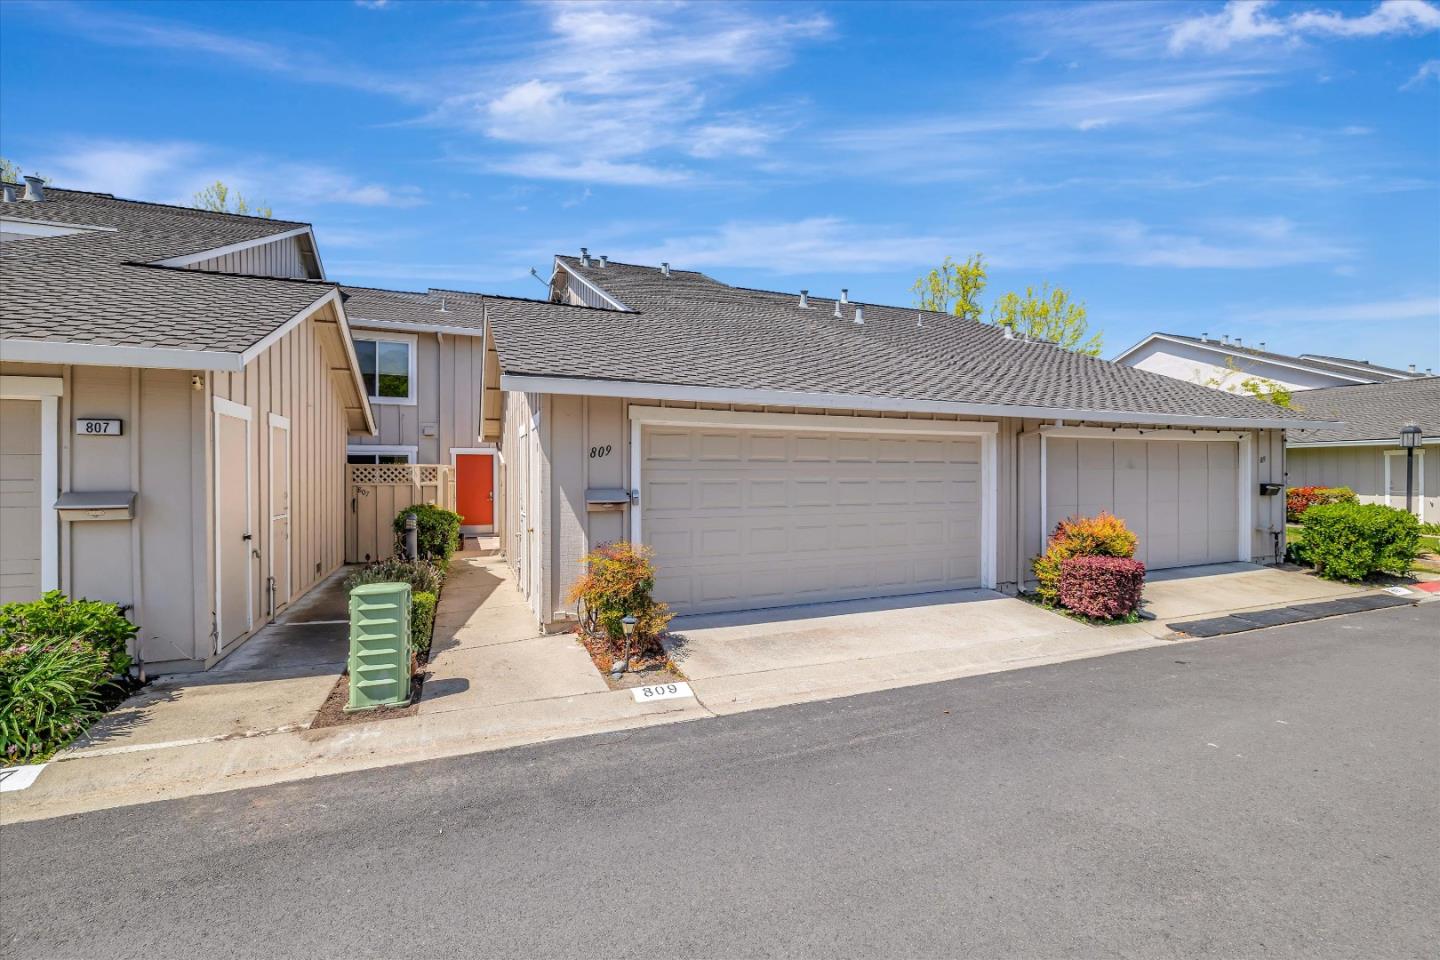 Photo of 809 Spruance Ln in Foster City, CA